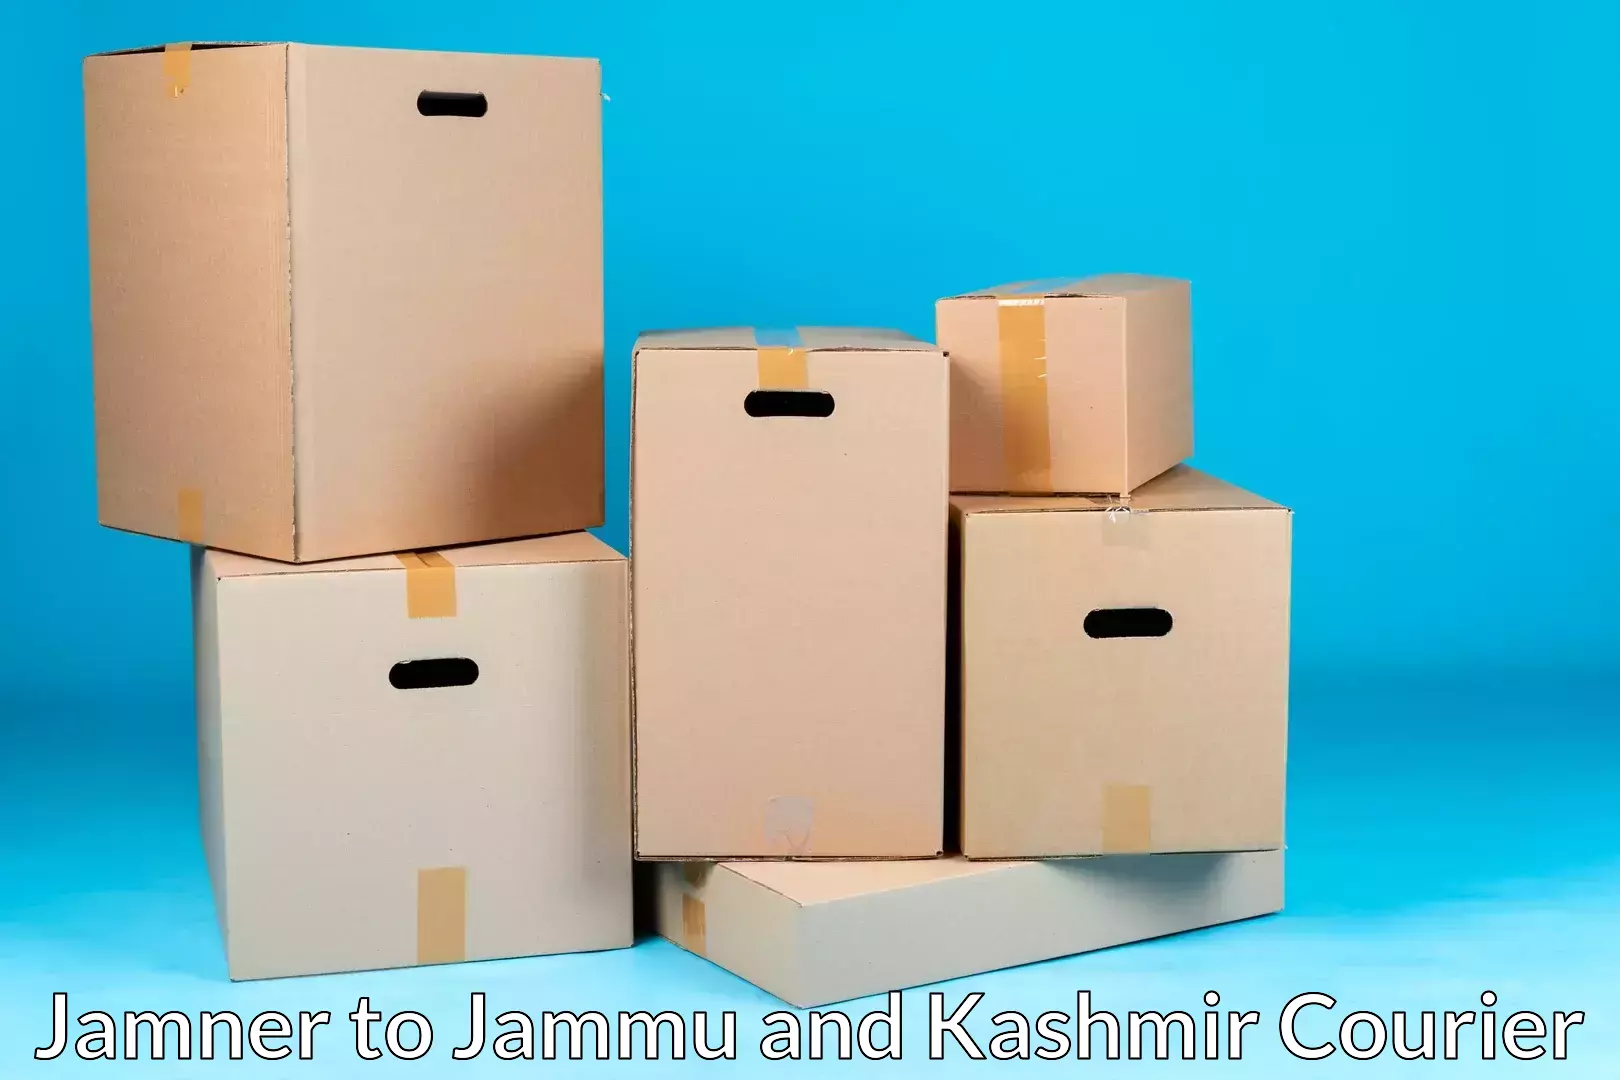 Moving and storage services in Jamner to Baramulla